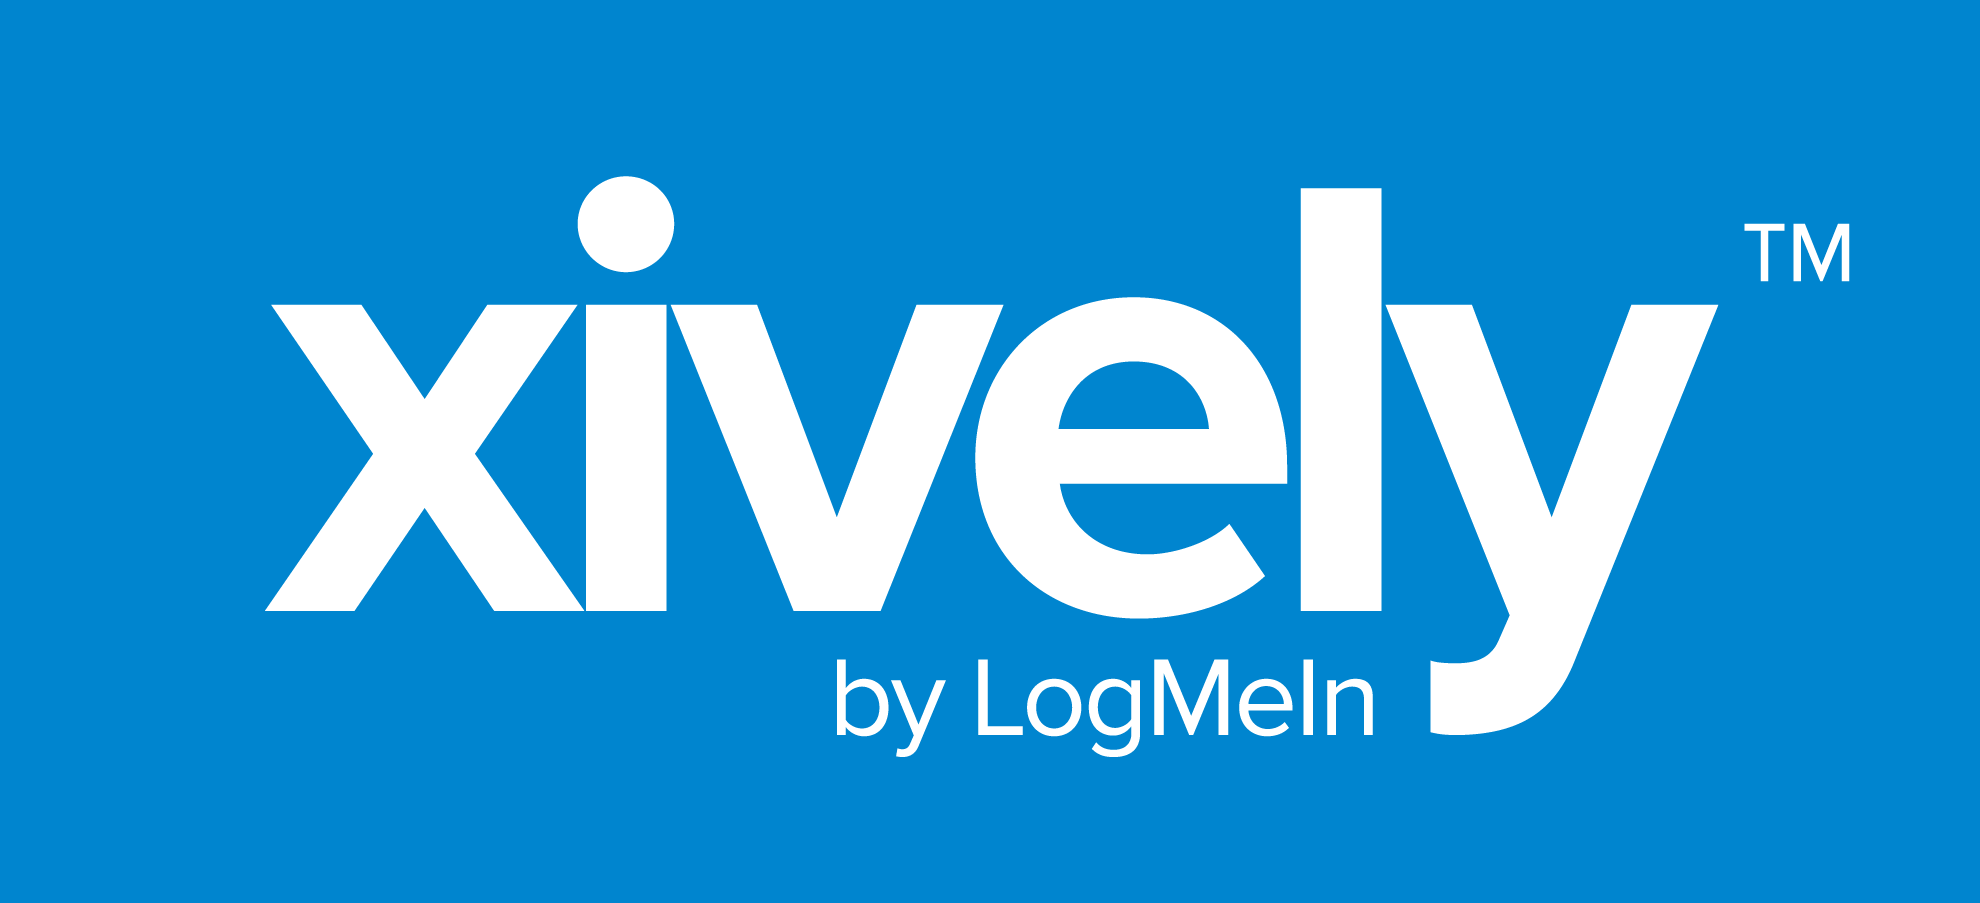 Log Me in Logo - Introducing Xively: LogMeIn's new Public Cloud for the IoT | LogMeIn